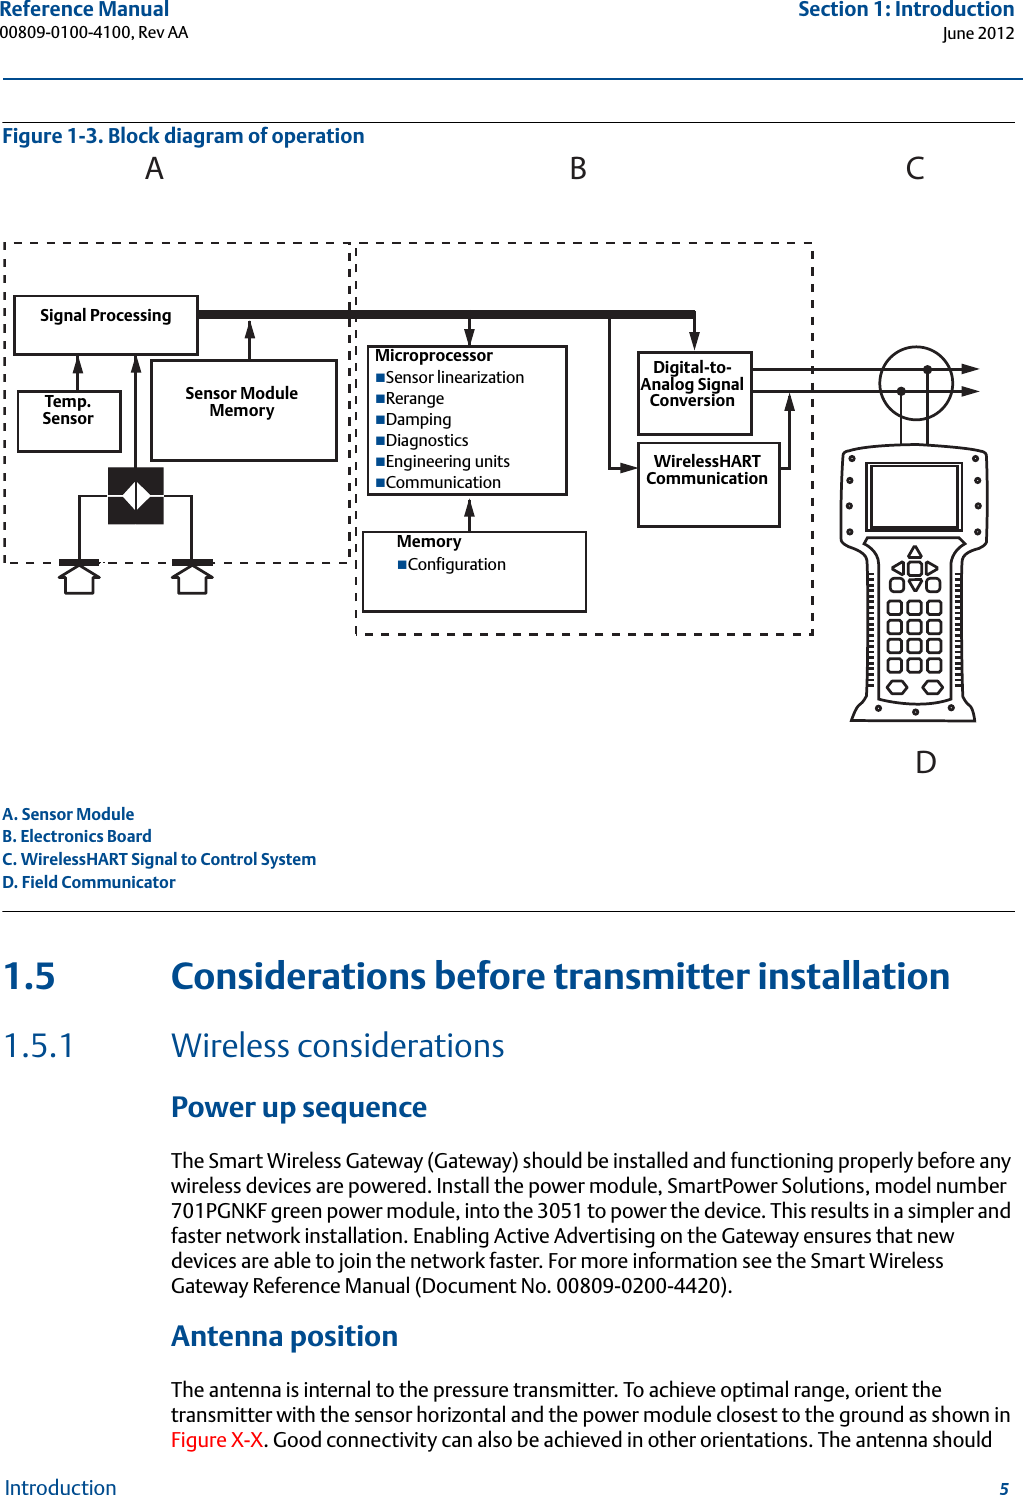 5Reference Manual 00809-0100-4100, Rev AASection 1: IntroductionJune 2012IntroductionFigure 1-3. Block diagram of operation A. Sensor ModuleB. Electronics BoardC. WirelessHART Signal to Control SystemD. Field Communicator1.5 Considerations before transmitter installation1.5.1 Wireless considerationsPower up sequenceThe Smart Wireless Gateway (Gateway) should be installed and functioning properly before any wireless devices are powered. Install the power module, SmartPower Solutions, model number 701PGNKF green power module, into the 3051 to power the device. This results in a simpler and faster network installation. Enabling Active Advertising on the Gateway ensures that new devices are able to join the network faster. For more information see the Smart Wireless Gateway Reference Manual (Document No. 00809-0200-4420).Antenna positionThe antenna is internal to the pressure transmitter. To achieve optimal range, orient the transmitter with the sensor horizontal and the power module closest to the ground as shown in Figure X-X. Good connectivity can also be achieved in other orientations. The antenna should ABCDSignal ProcessingTemp. SensorSensor Module MemoryMicroprocessorSensor linearizationRerangeDampingDiagnosticsEngineering unitsCommunicationMemoryConfigurationDigital-to-Analog Signal ConversionWirelessHART Communication